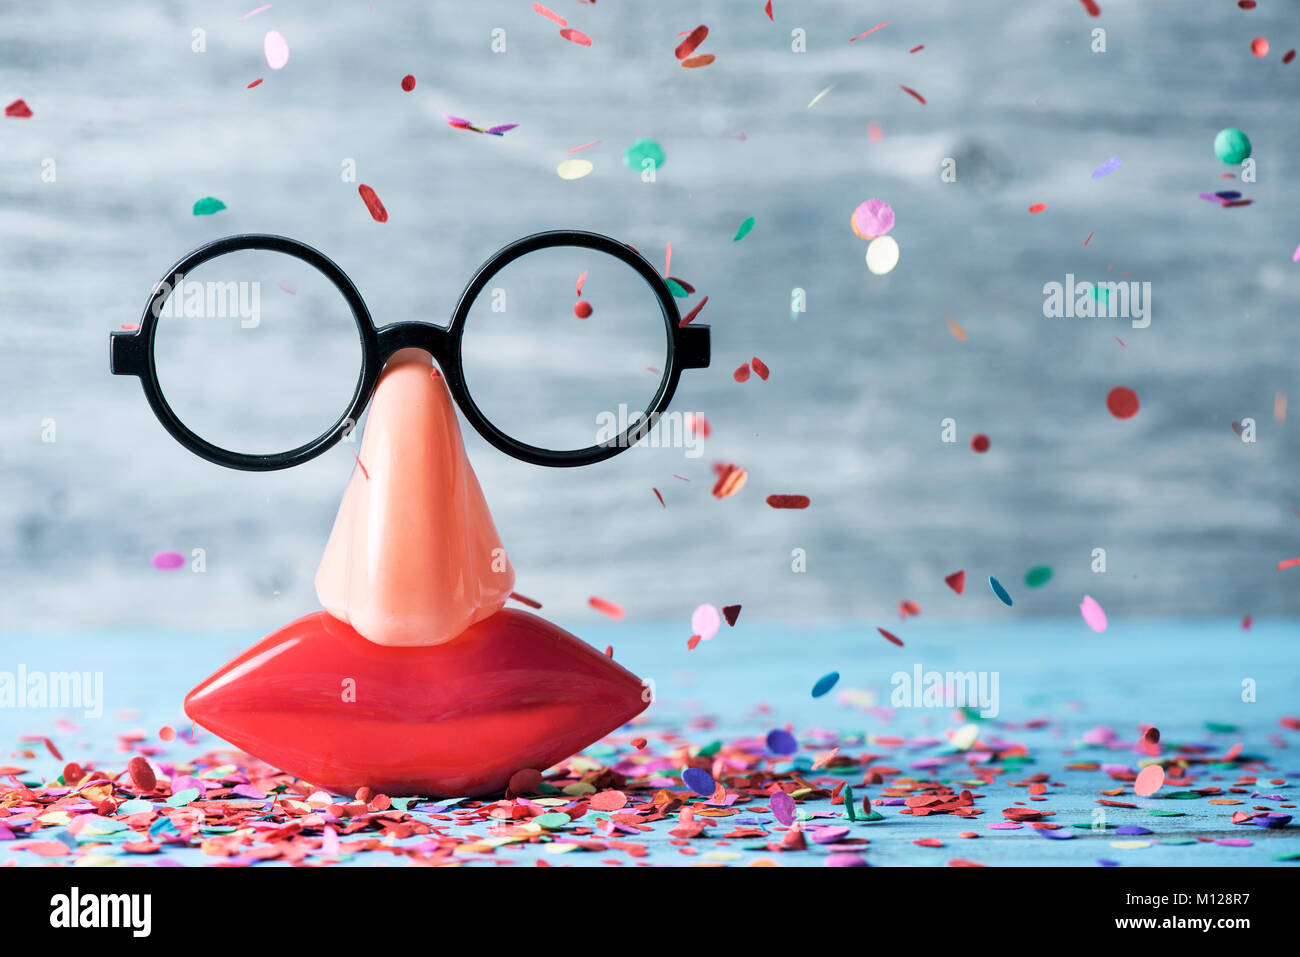 closeup of a pair of fake black glasses, a nose and a mouth forming the face of a person on a blue rustic wooden surface full of confetti Stock Photo